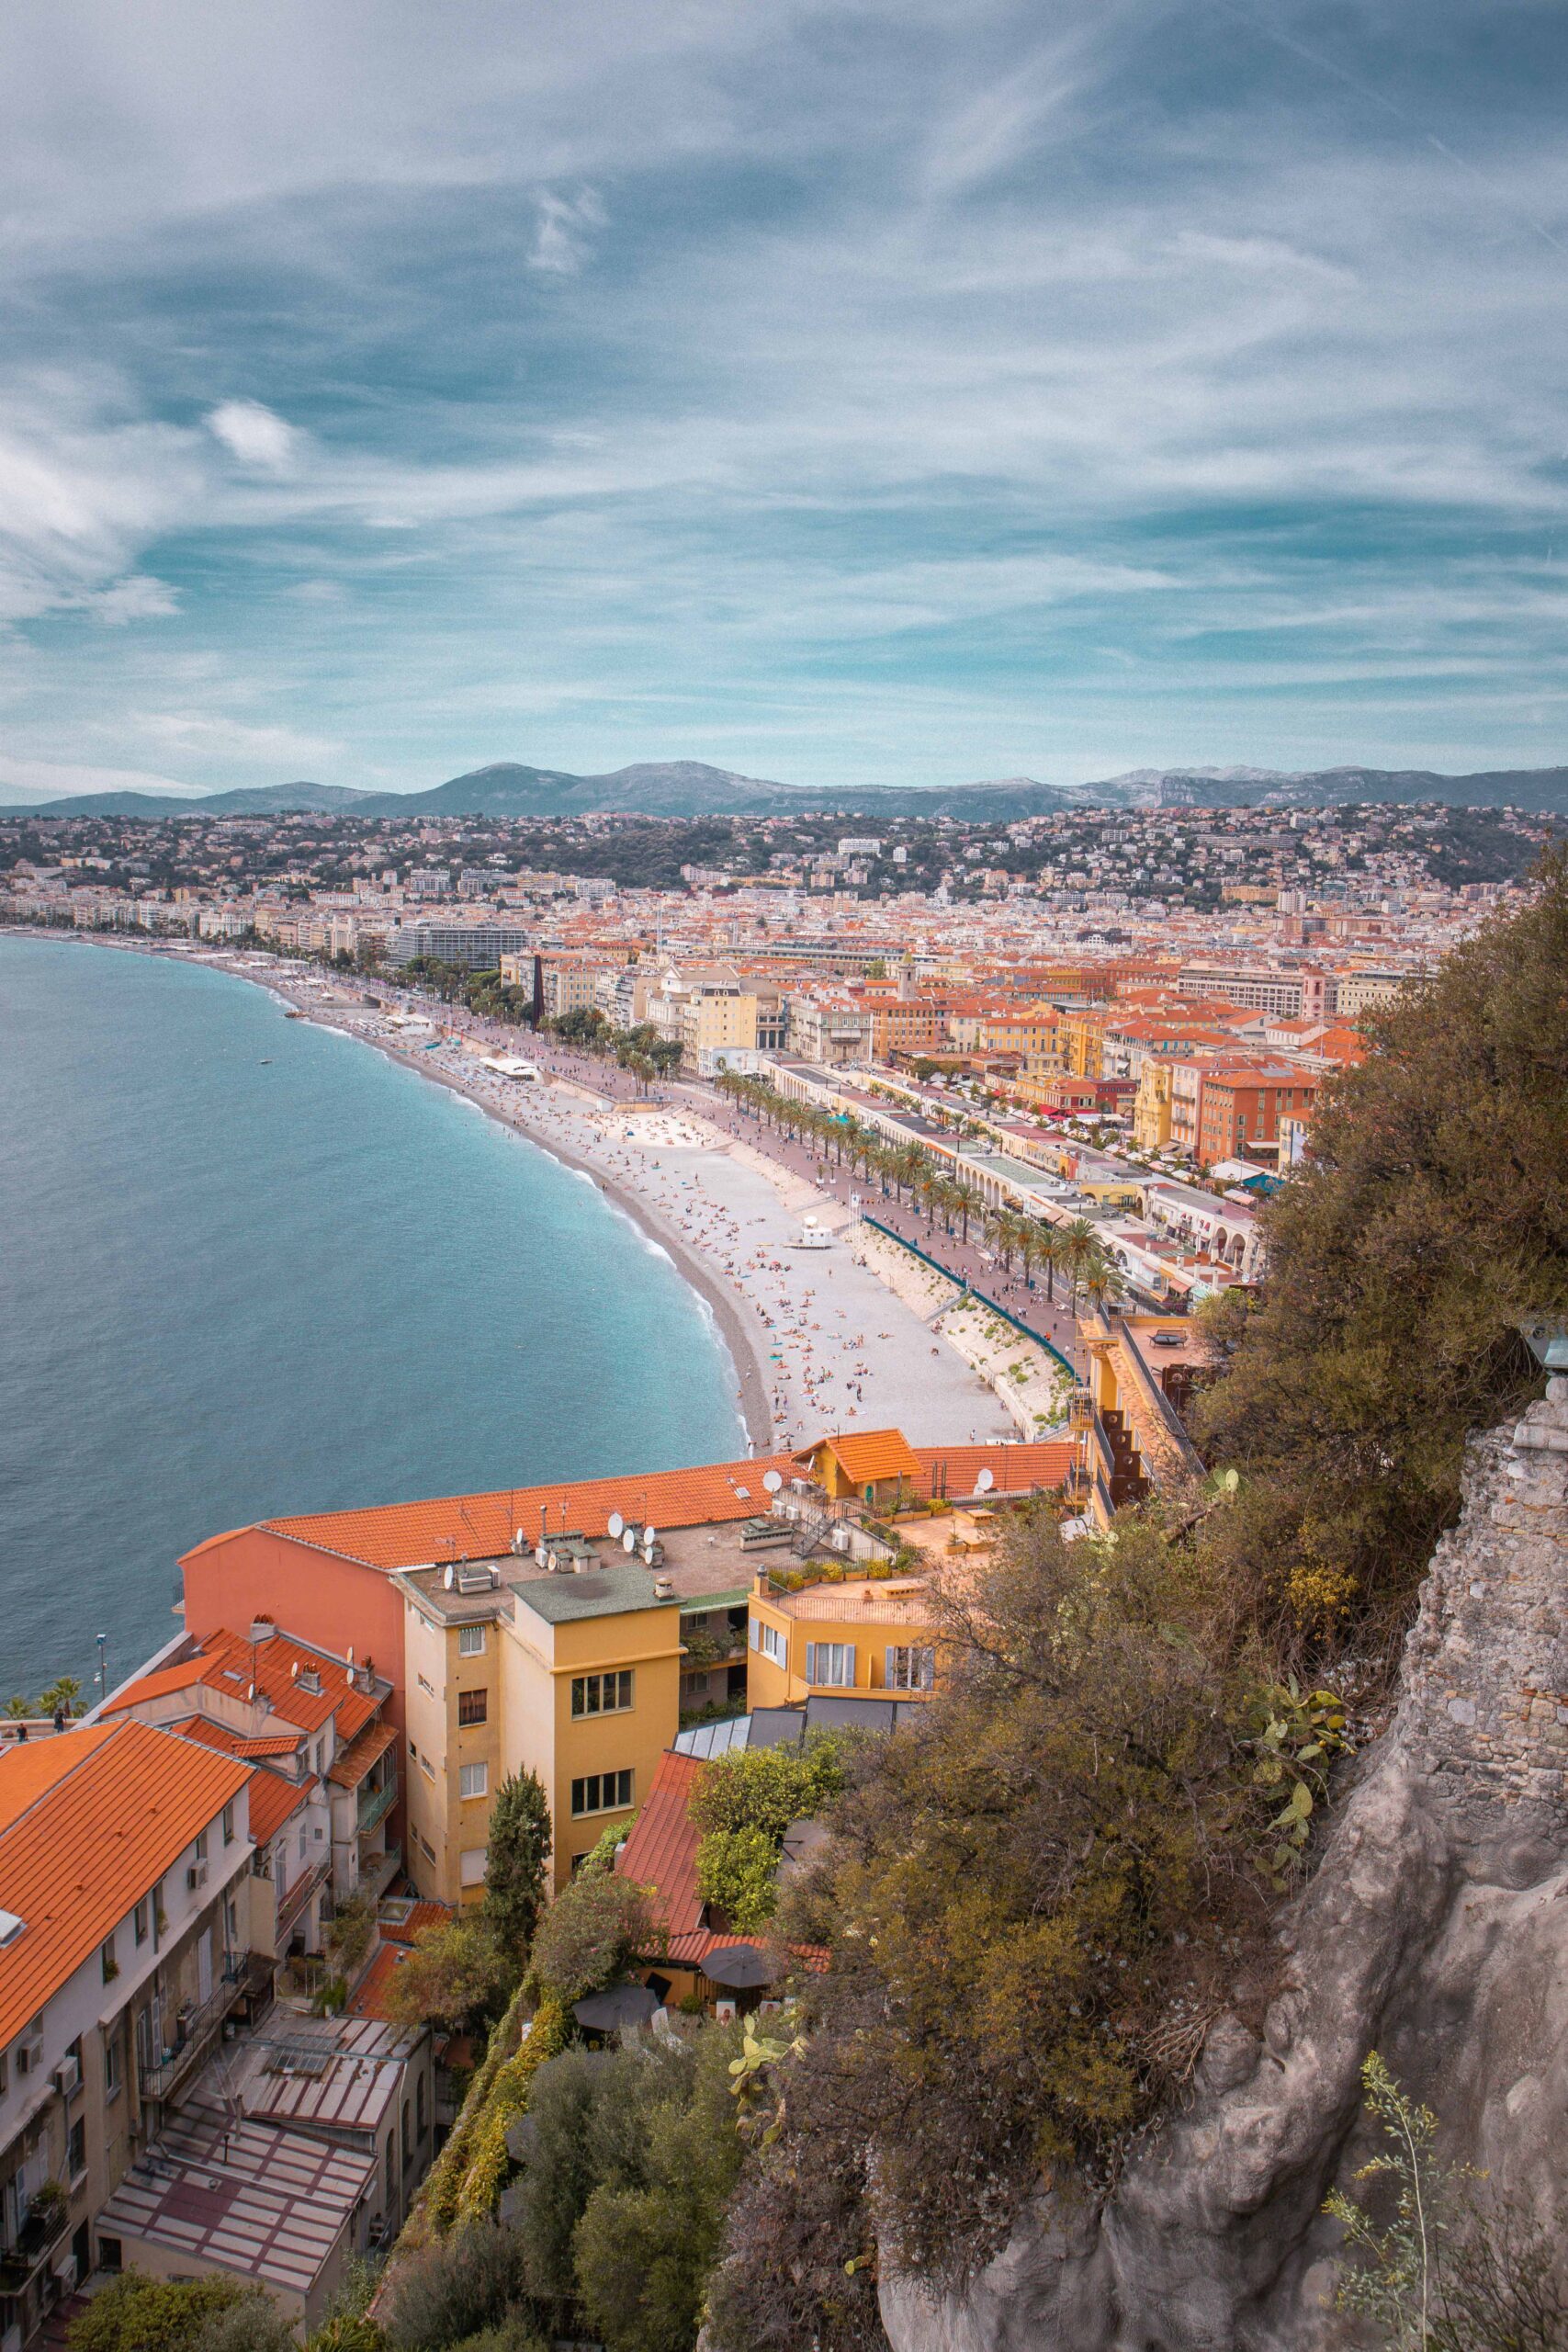 Panoramic view of the Promenade des Anglais, the pebble beach and rooftops as seen from the Colline du Château (Castle Hill) park in Nice, France